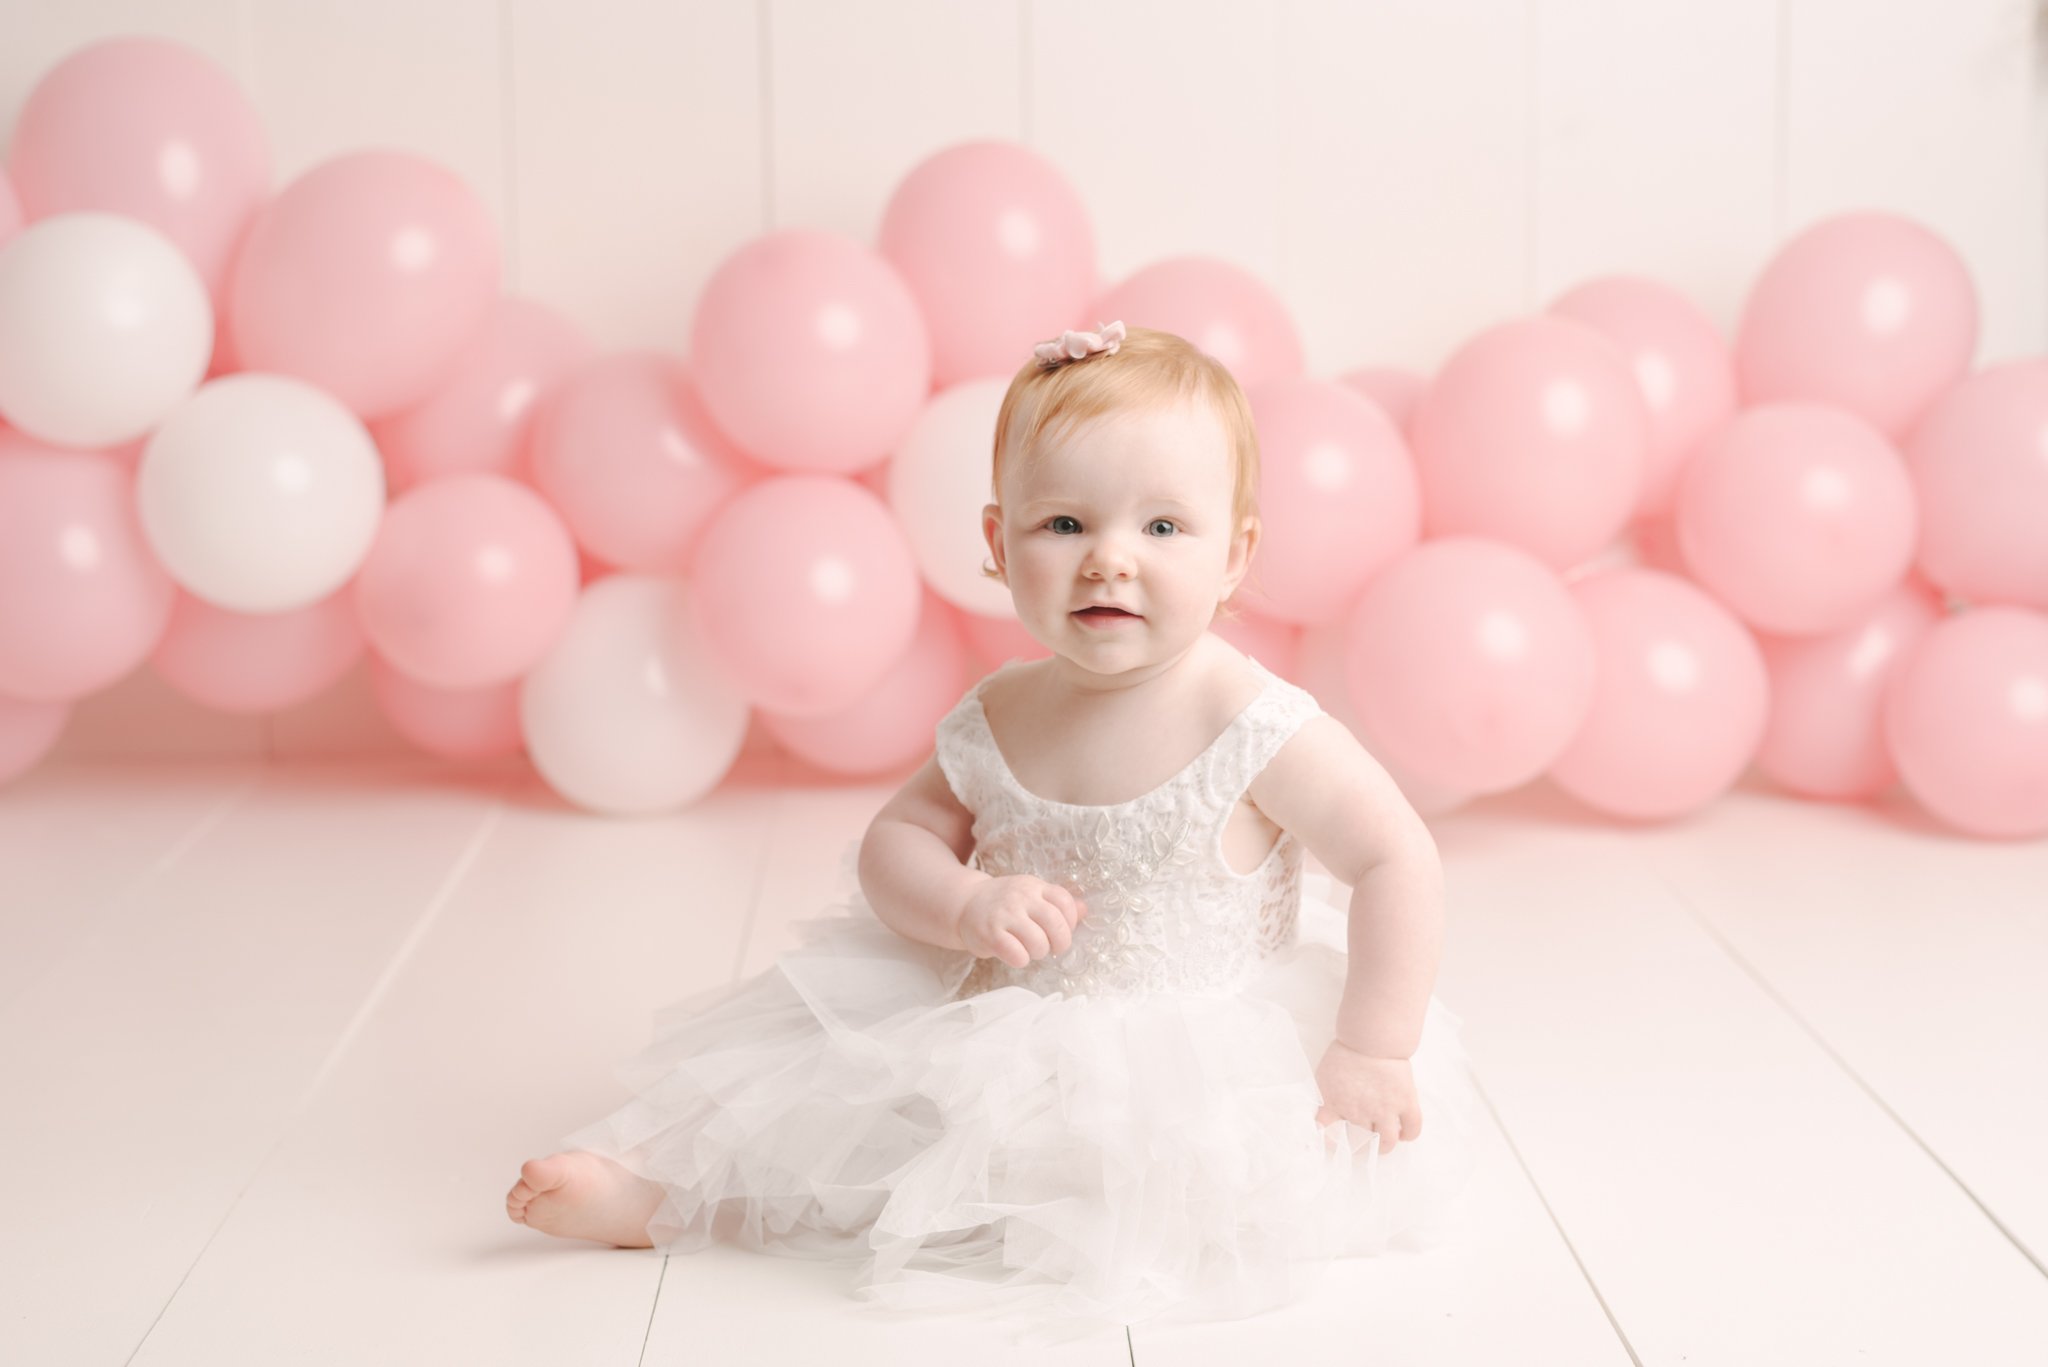 Simple_Pink_Pearls_Frist_Birthday_Girl_Smash_and_Splash_Session_Cake_Studio_by_Erika_Child_and_Family_Photographer_for_Christie_Leigh_Photo_in_cortland_OH_Ohio_Trumbull_County_001.jpg